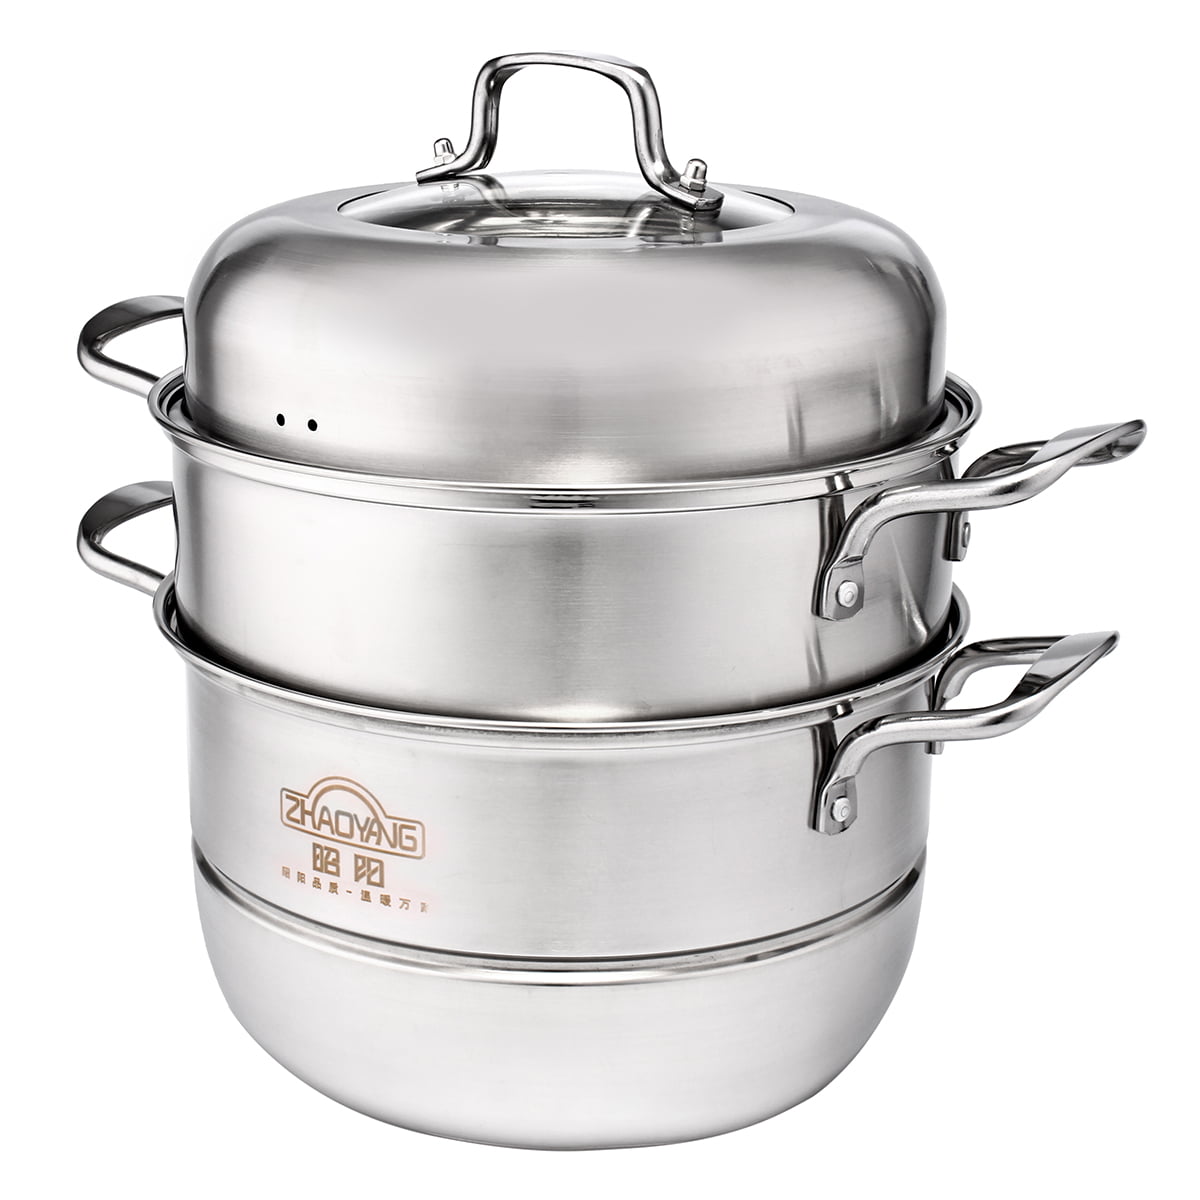 3 TIER STAINLESS STEEL VEGETABLE FOOD STEAMER SET DISH INDUCTION  2 SIZES 